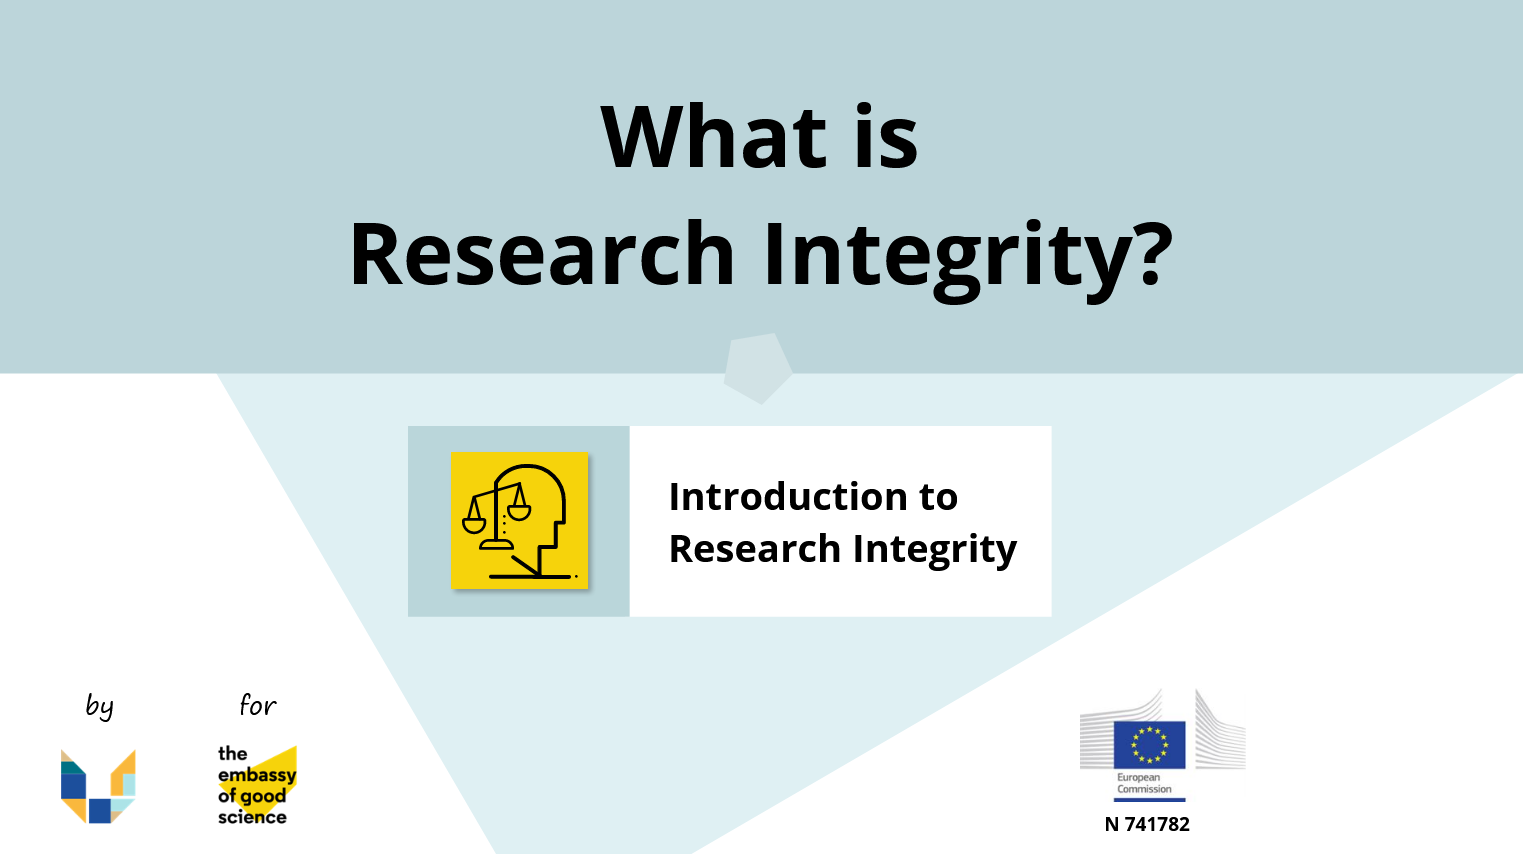 Introduction to Research Integrity